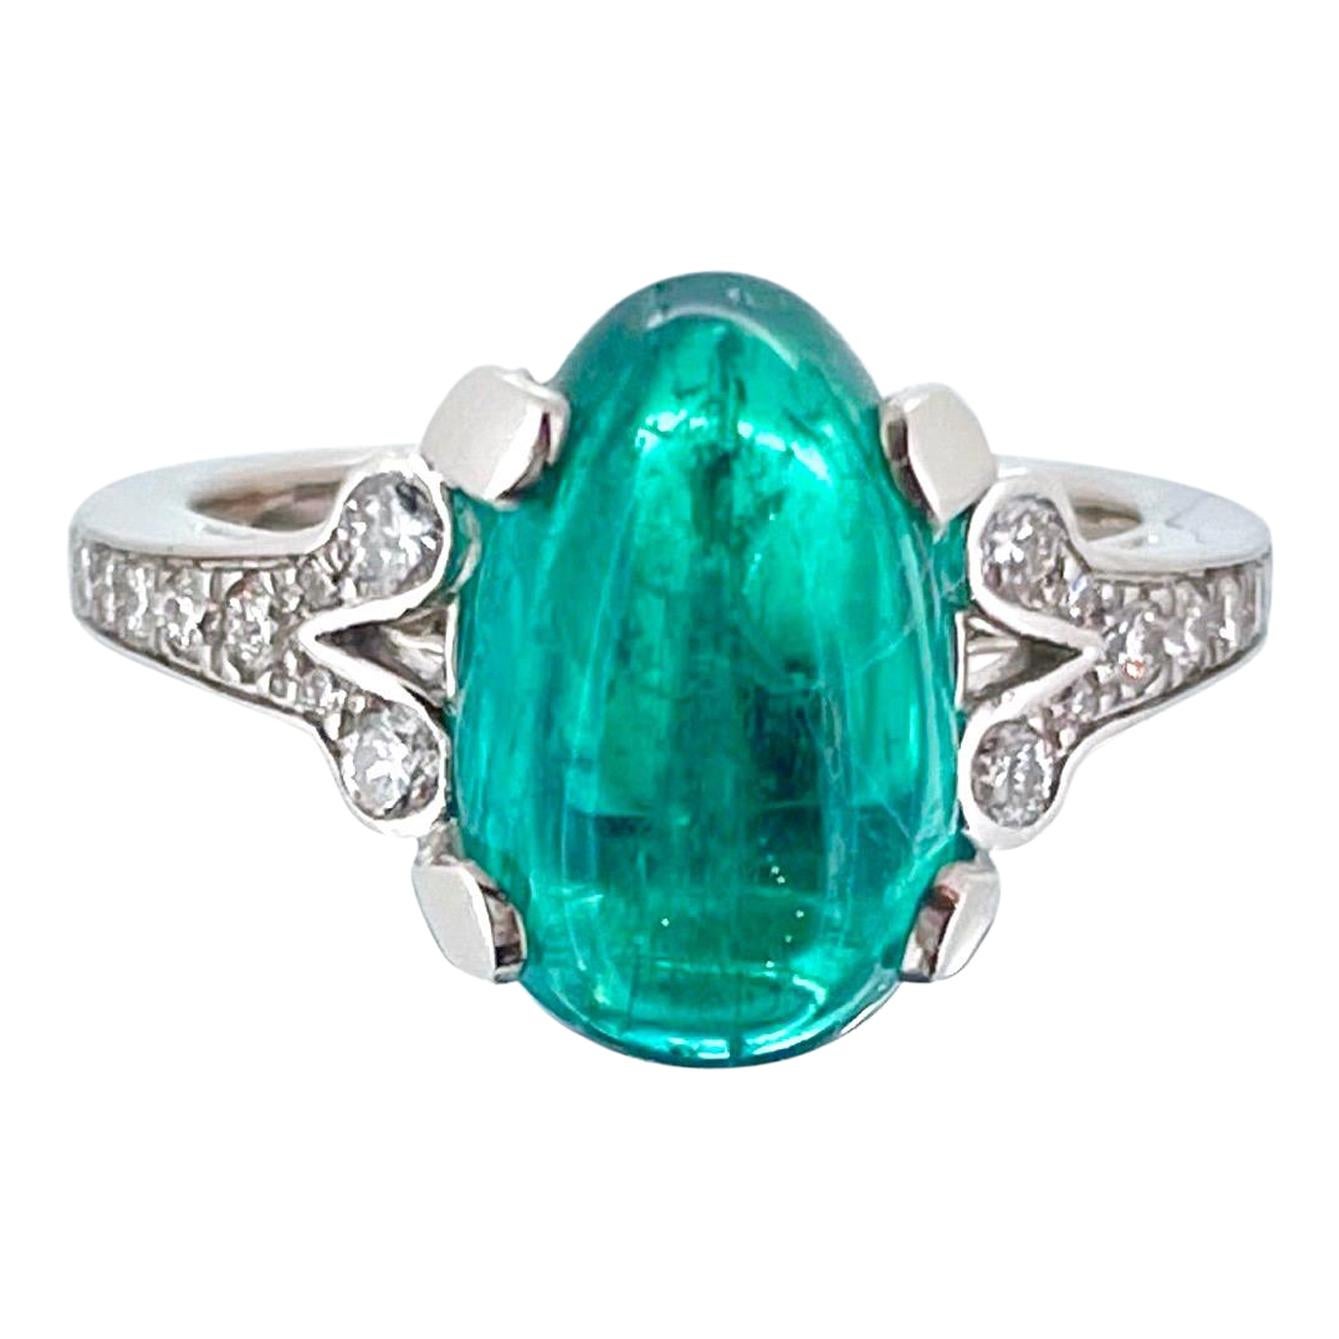 3.37ct Colombian Emerald Cabochon Cut and Diamonds Platinum Ring For Sale